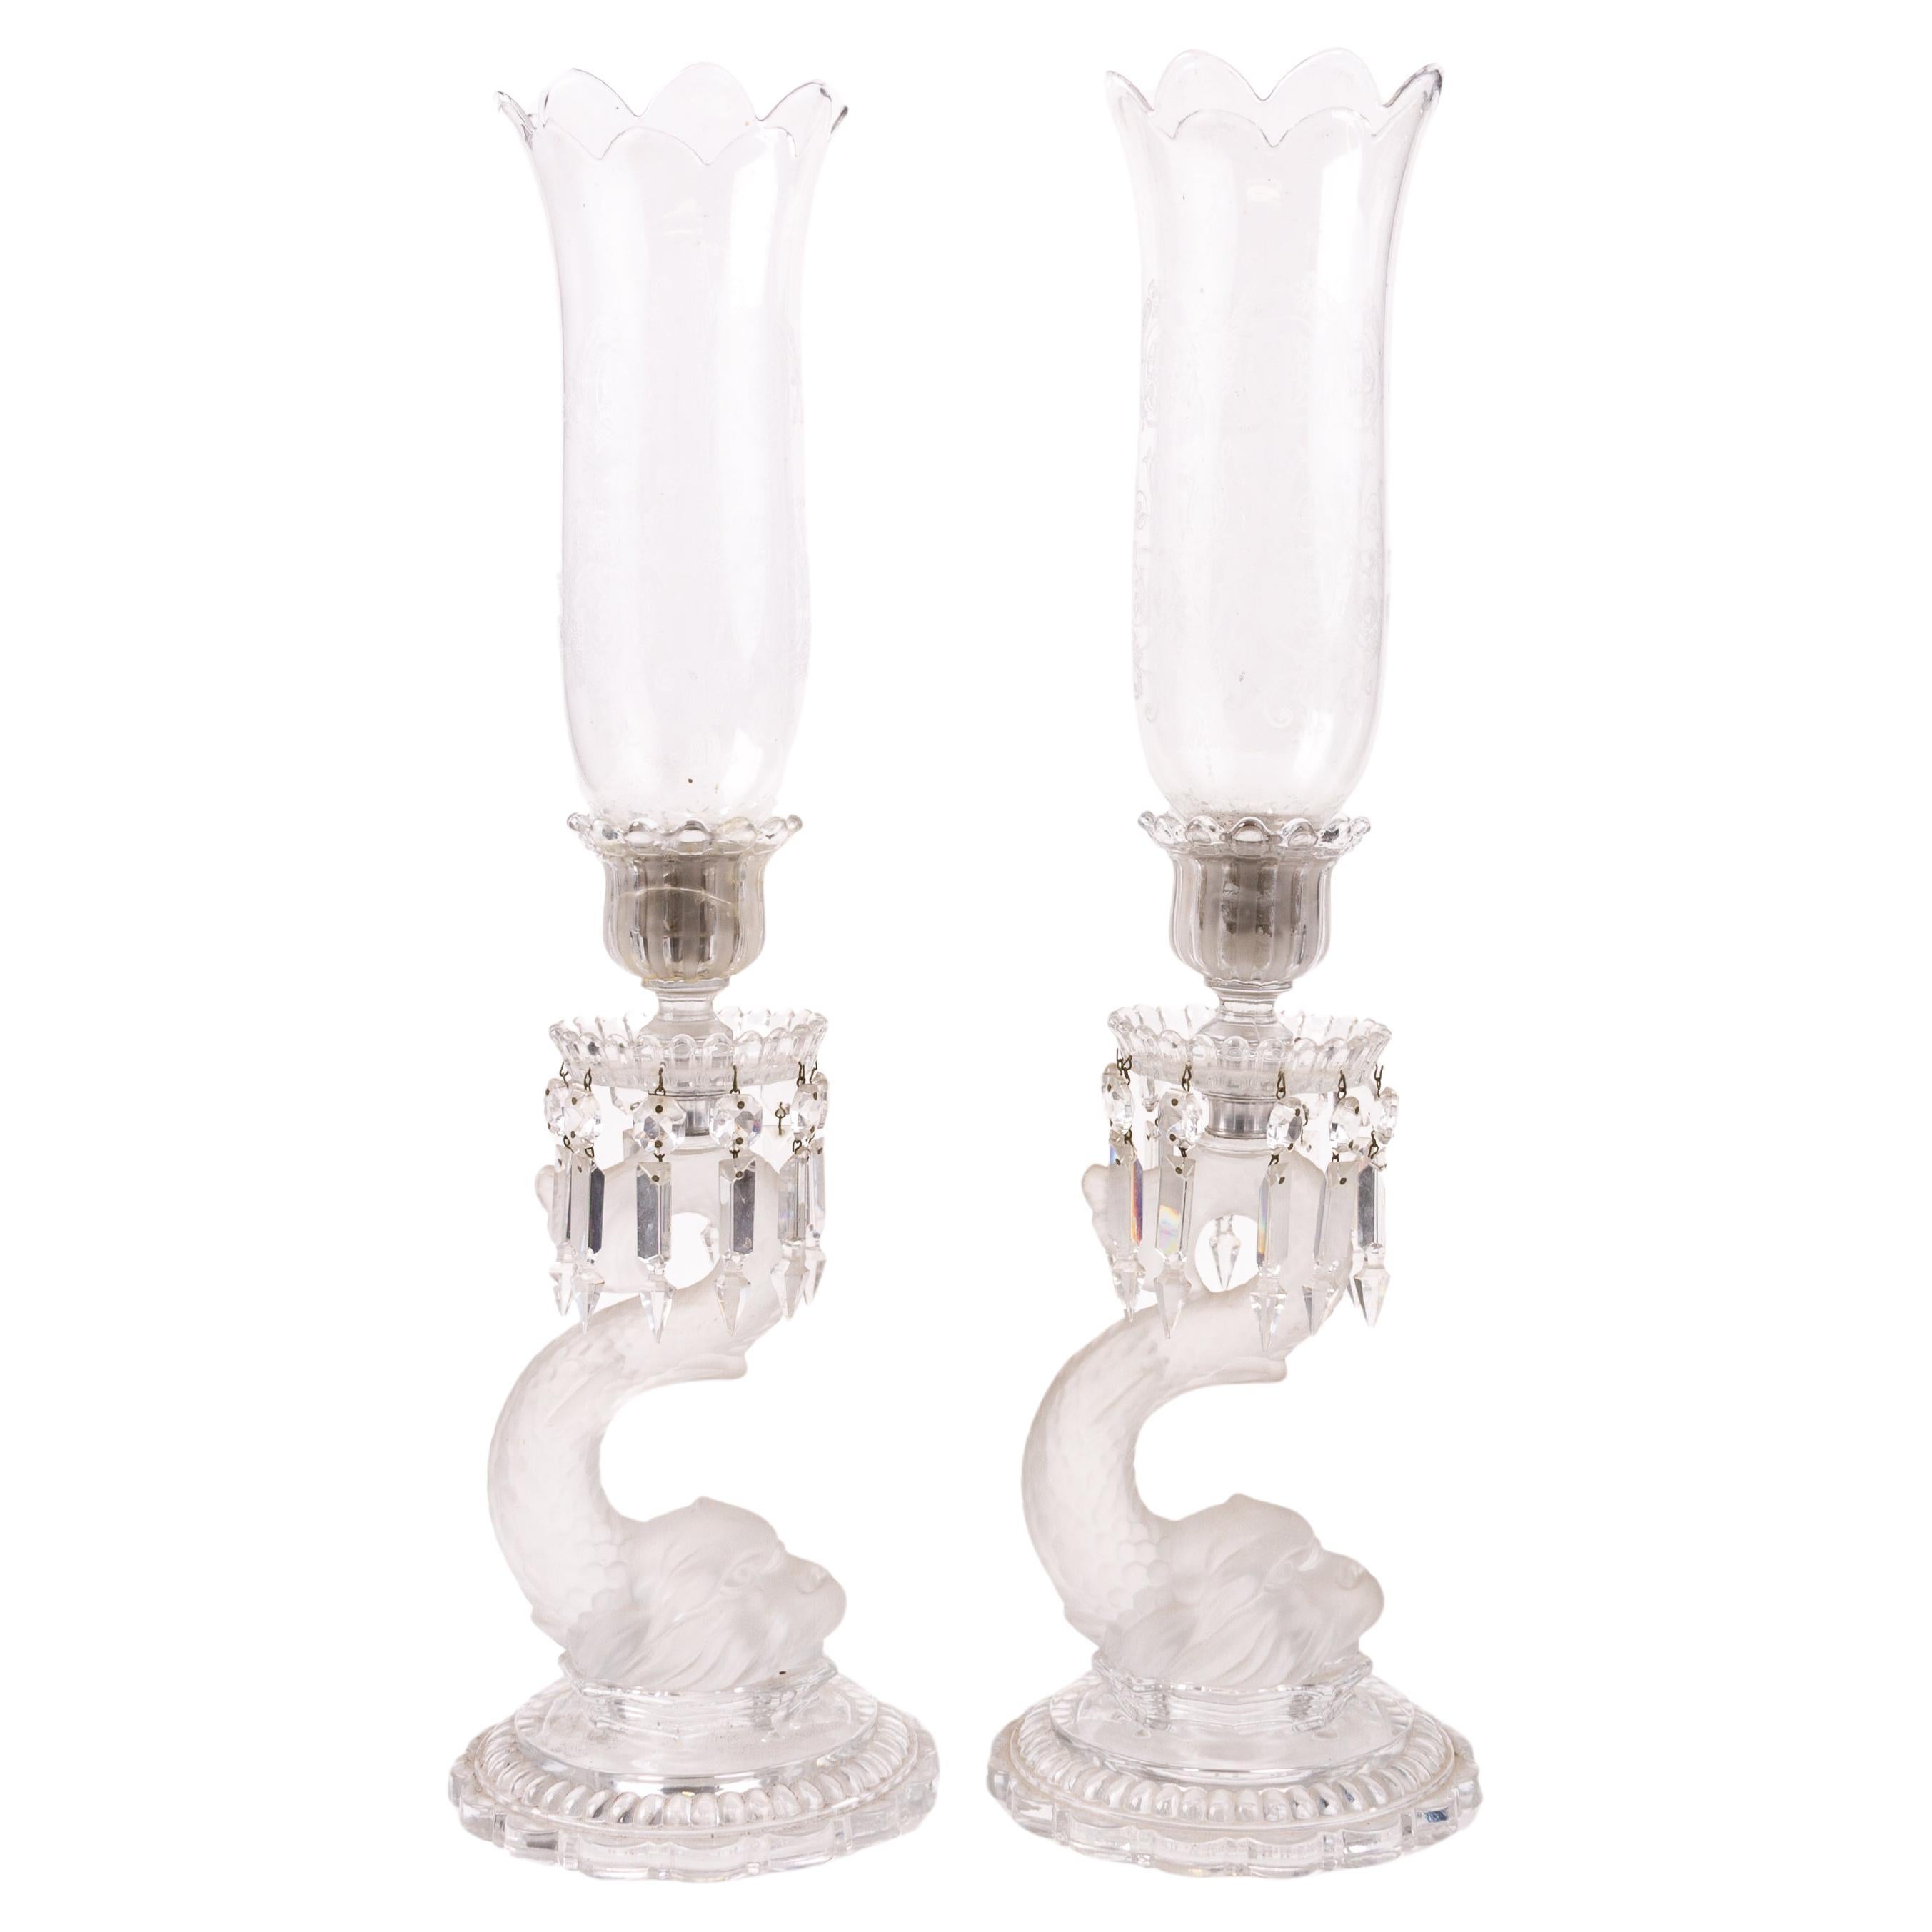 Pair of Baccarat Crystal Dolphin Candle Holders Early 20th Century